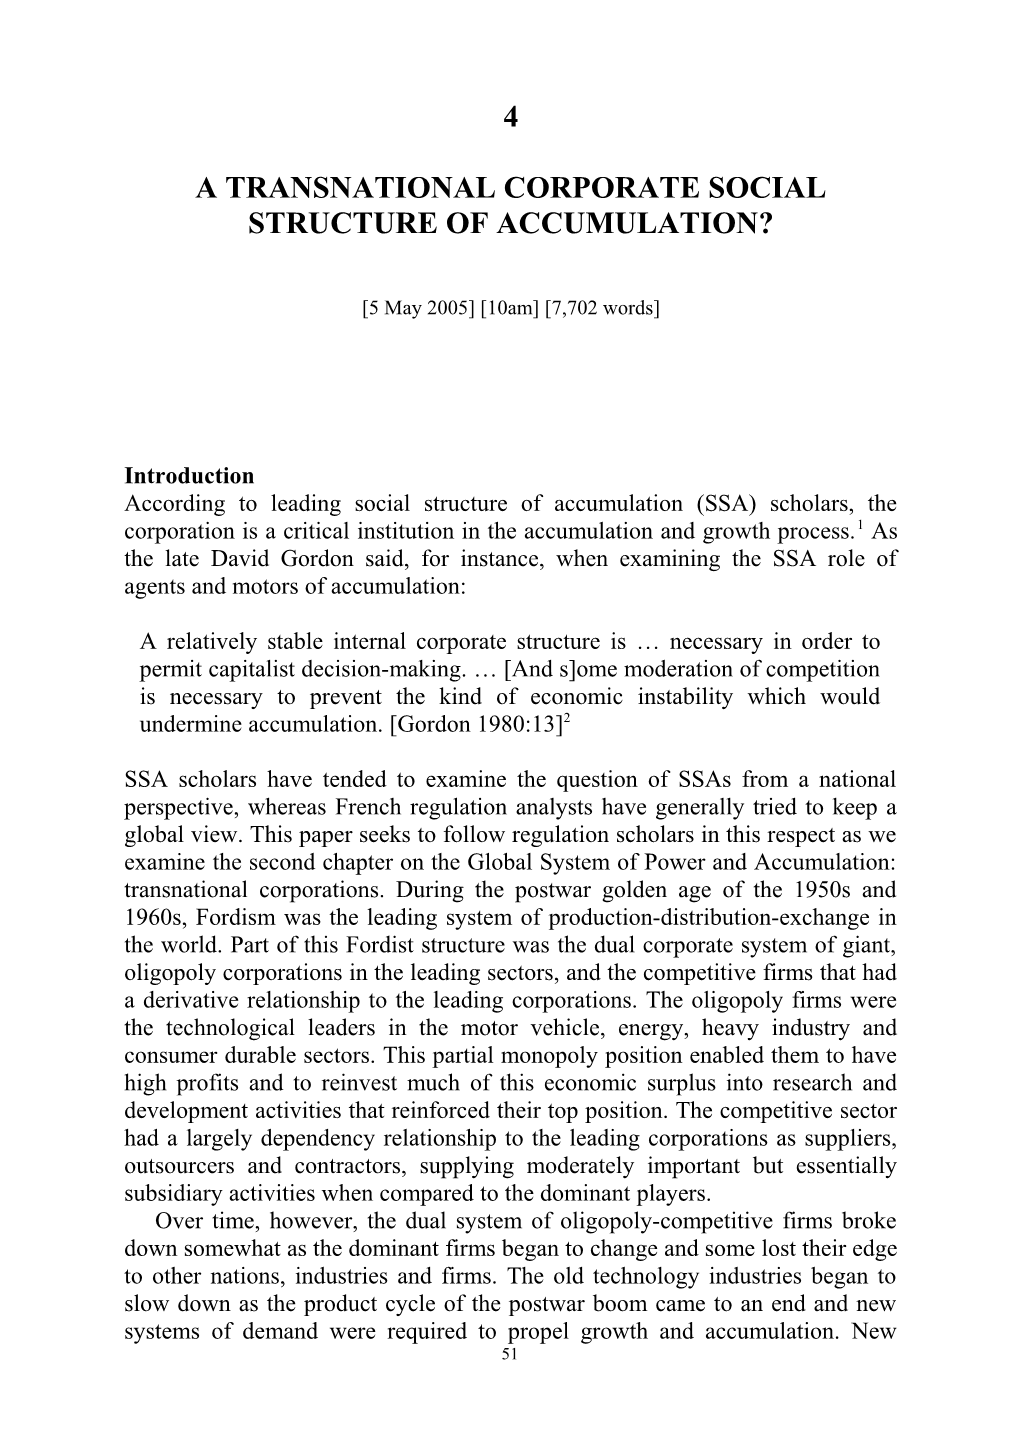 An Emerging Global Monetary-Trade Social Structure of Accumulation for Long Wave Upswing